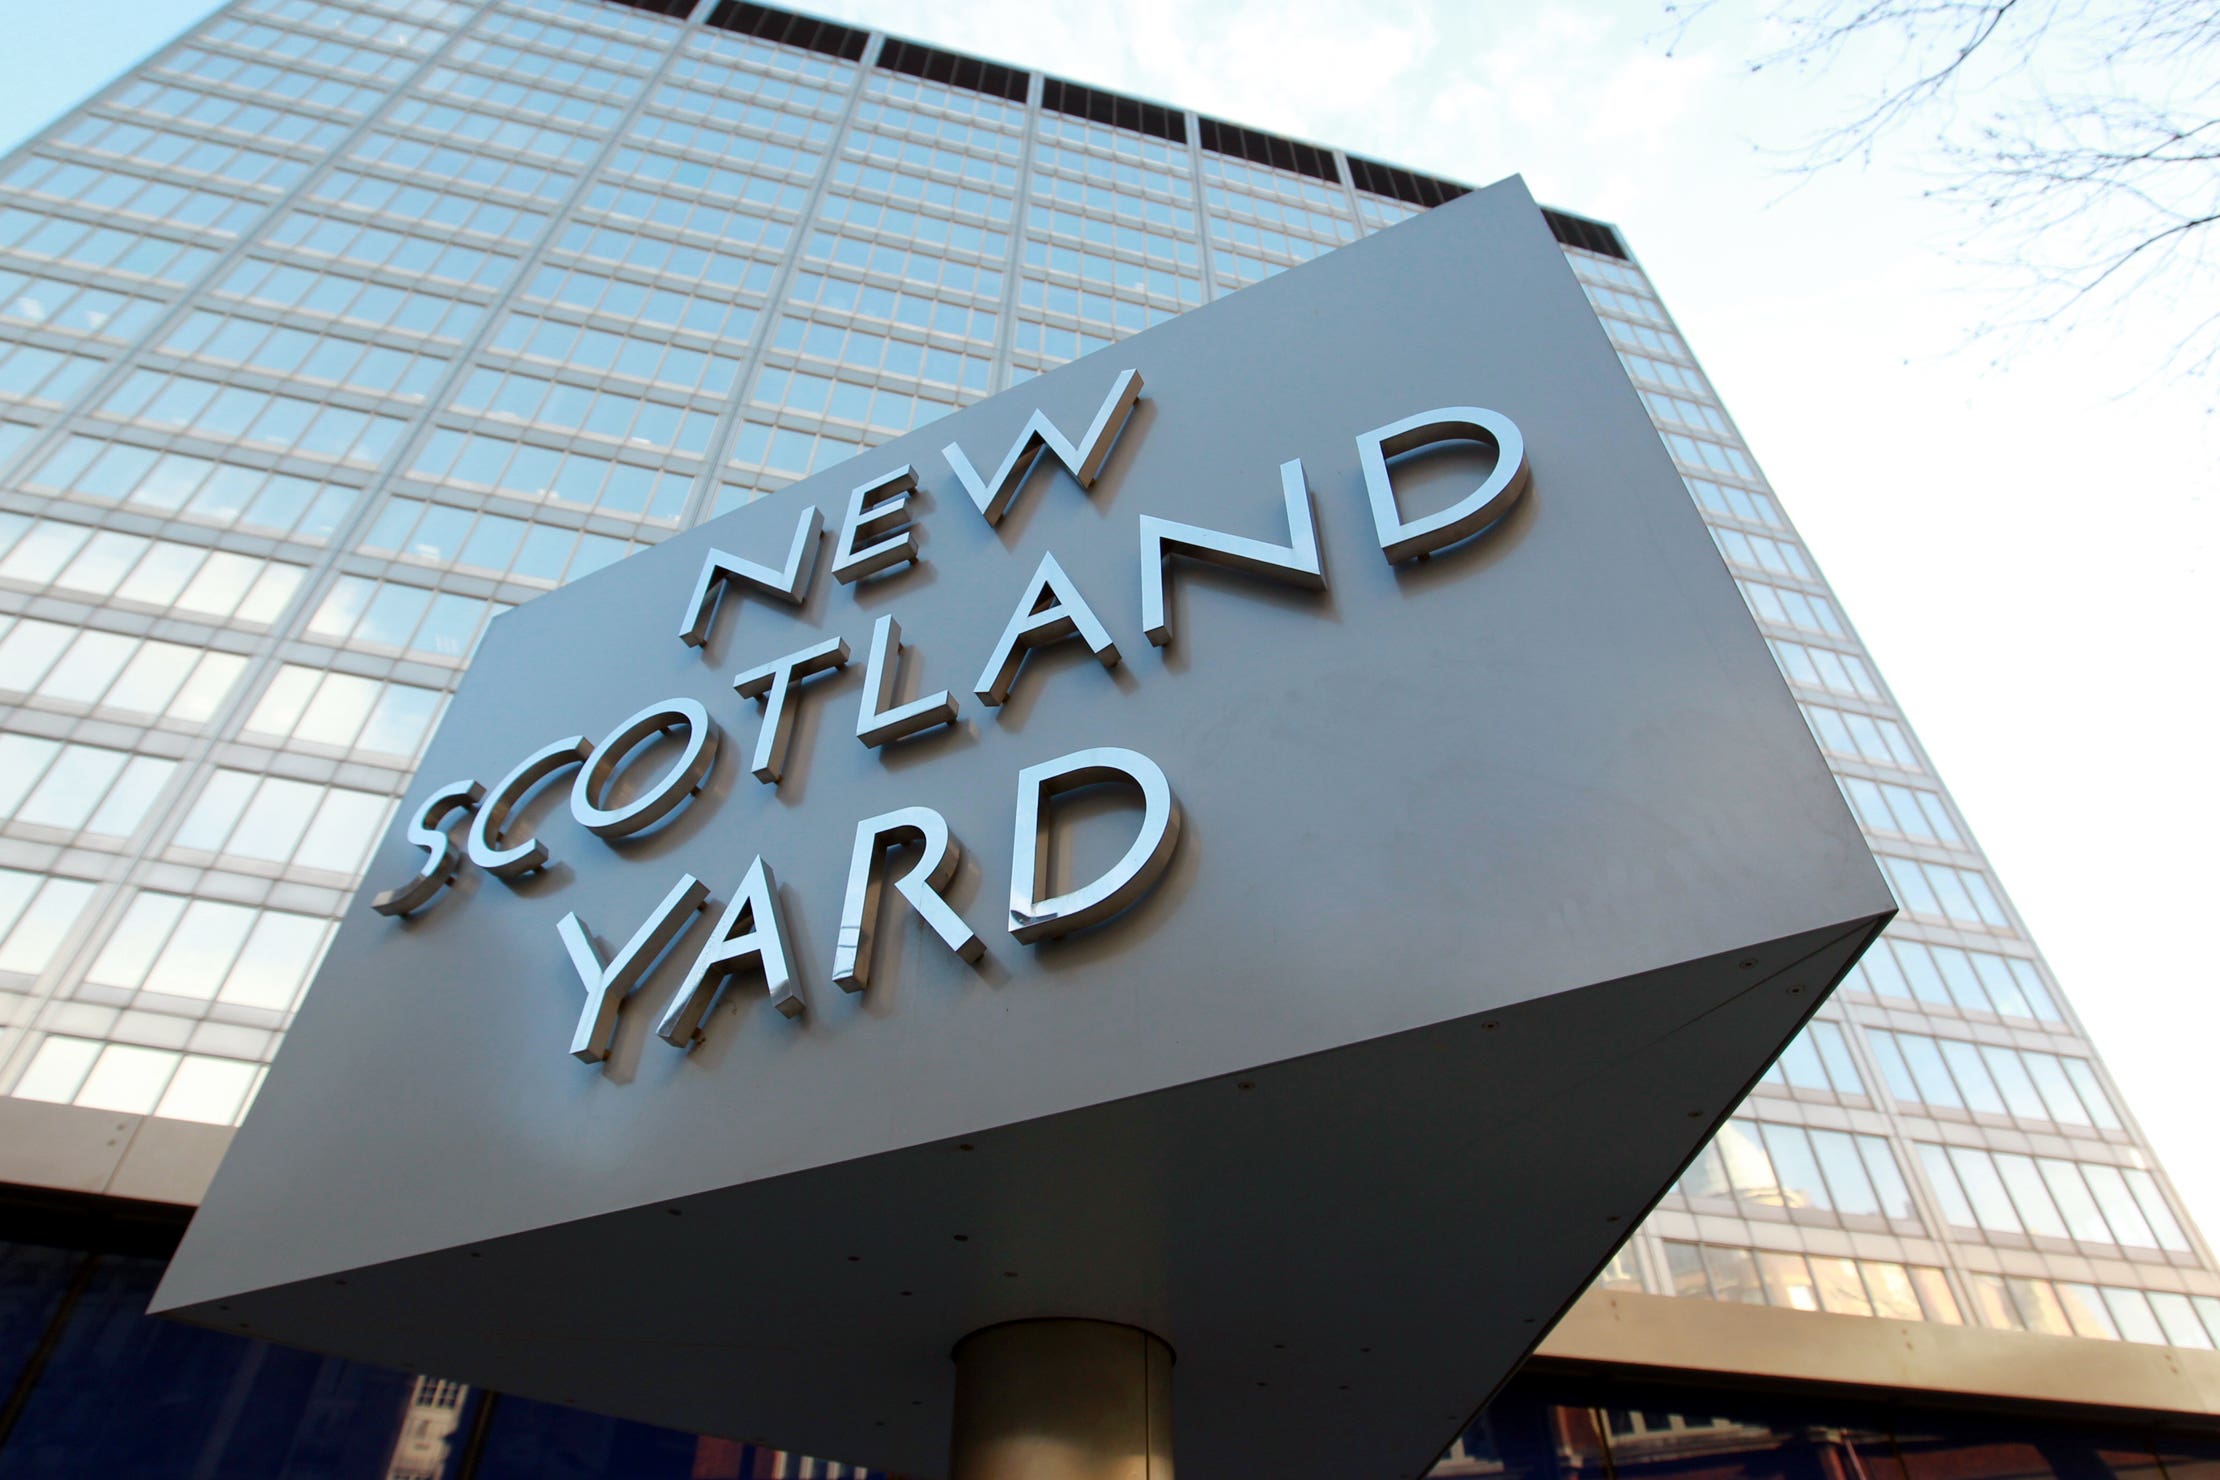 The Met said a file of evidence was passed to the CPS on 31 October